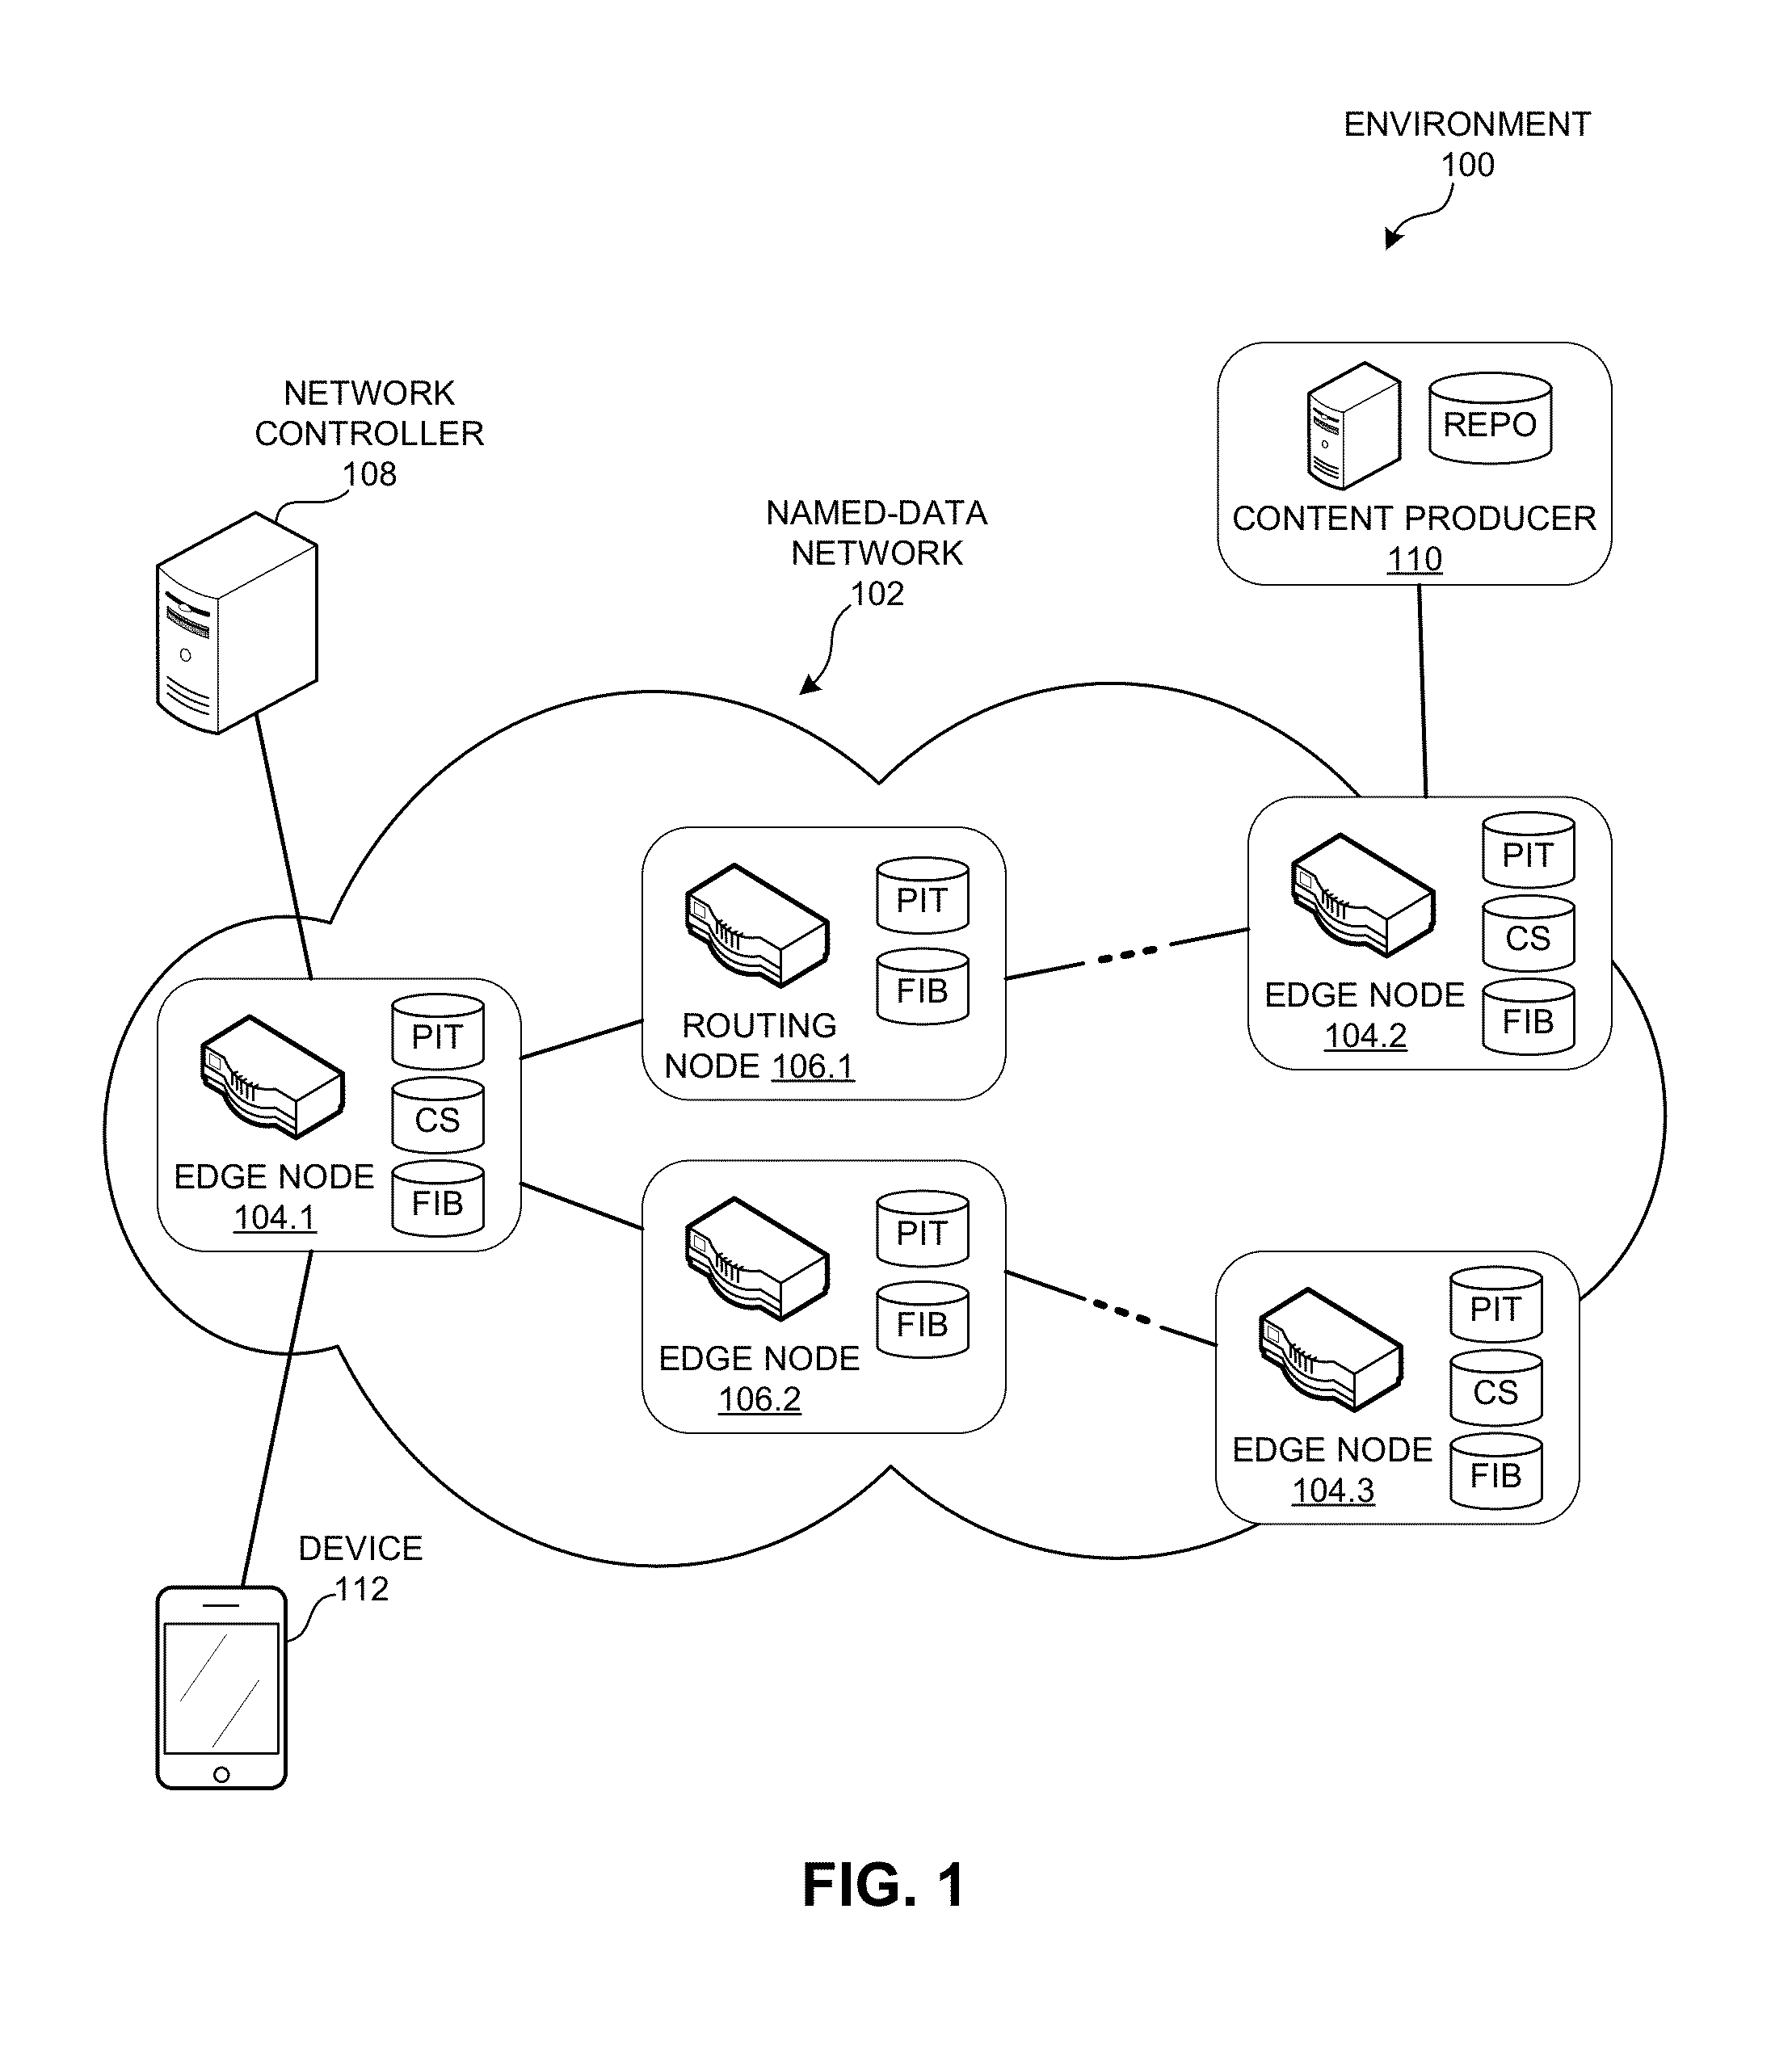 Interest messages with a payload for a named data network